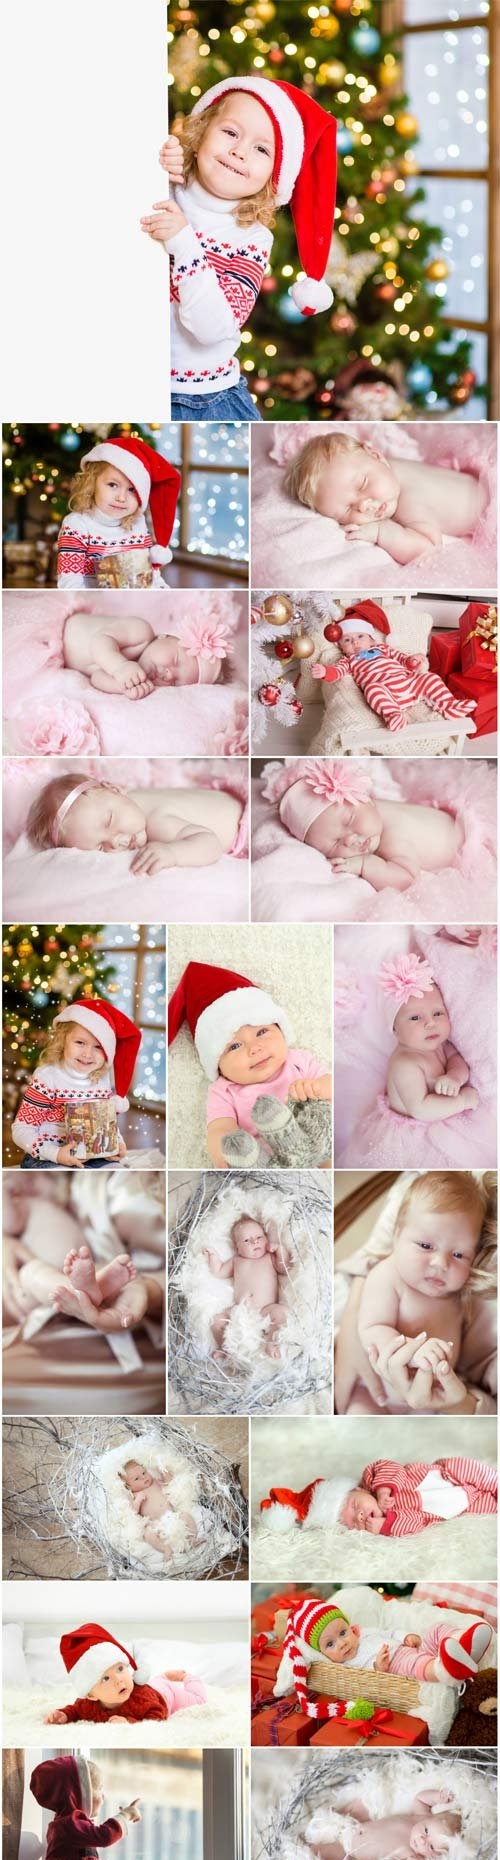 New Year and Christmas stock photos - 60